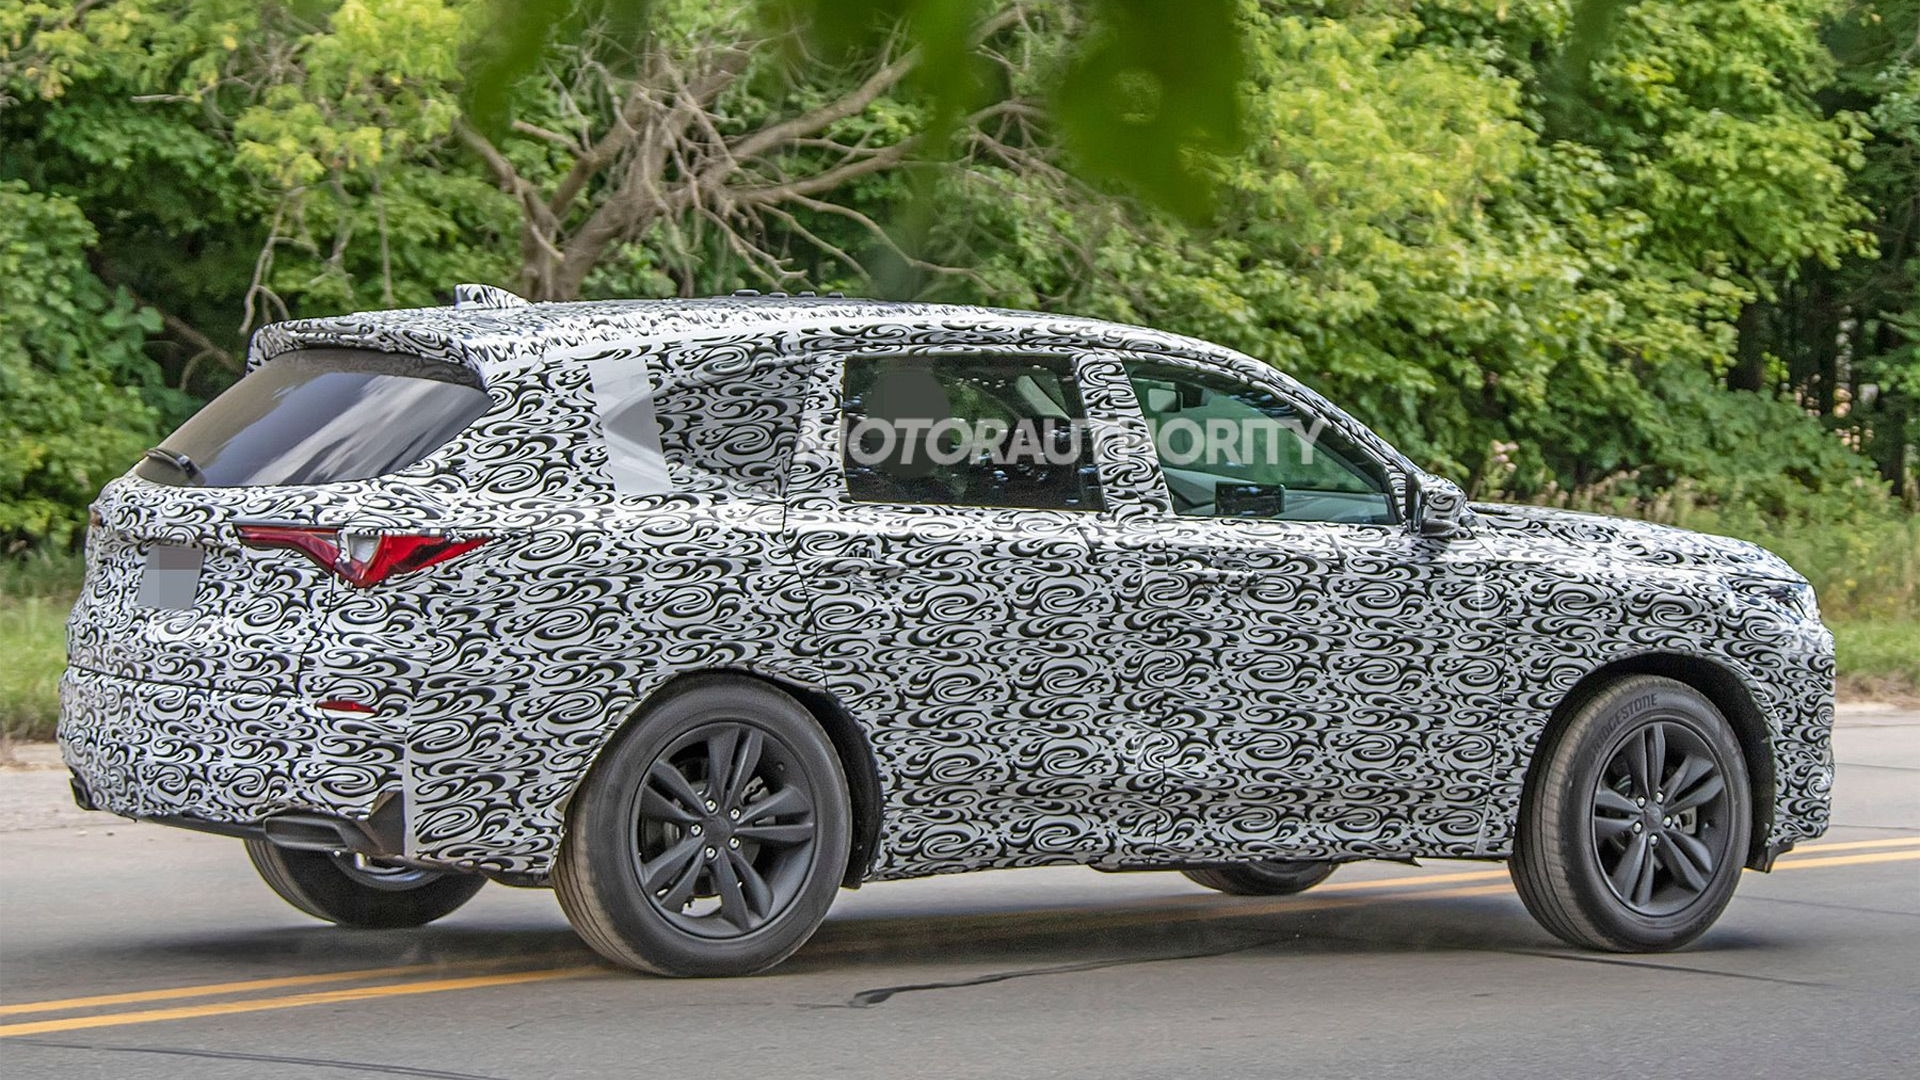 2022 Acura MDX spy shots Popular crossover to be graced with